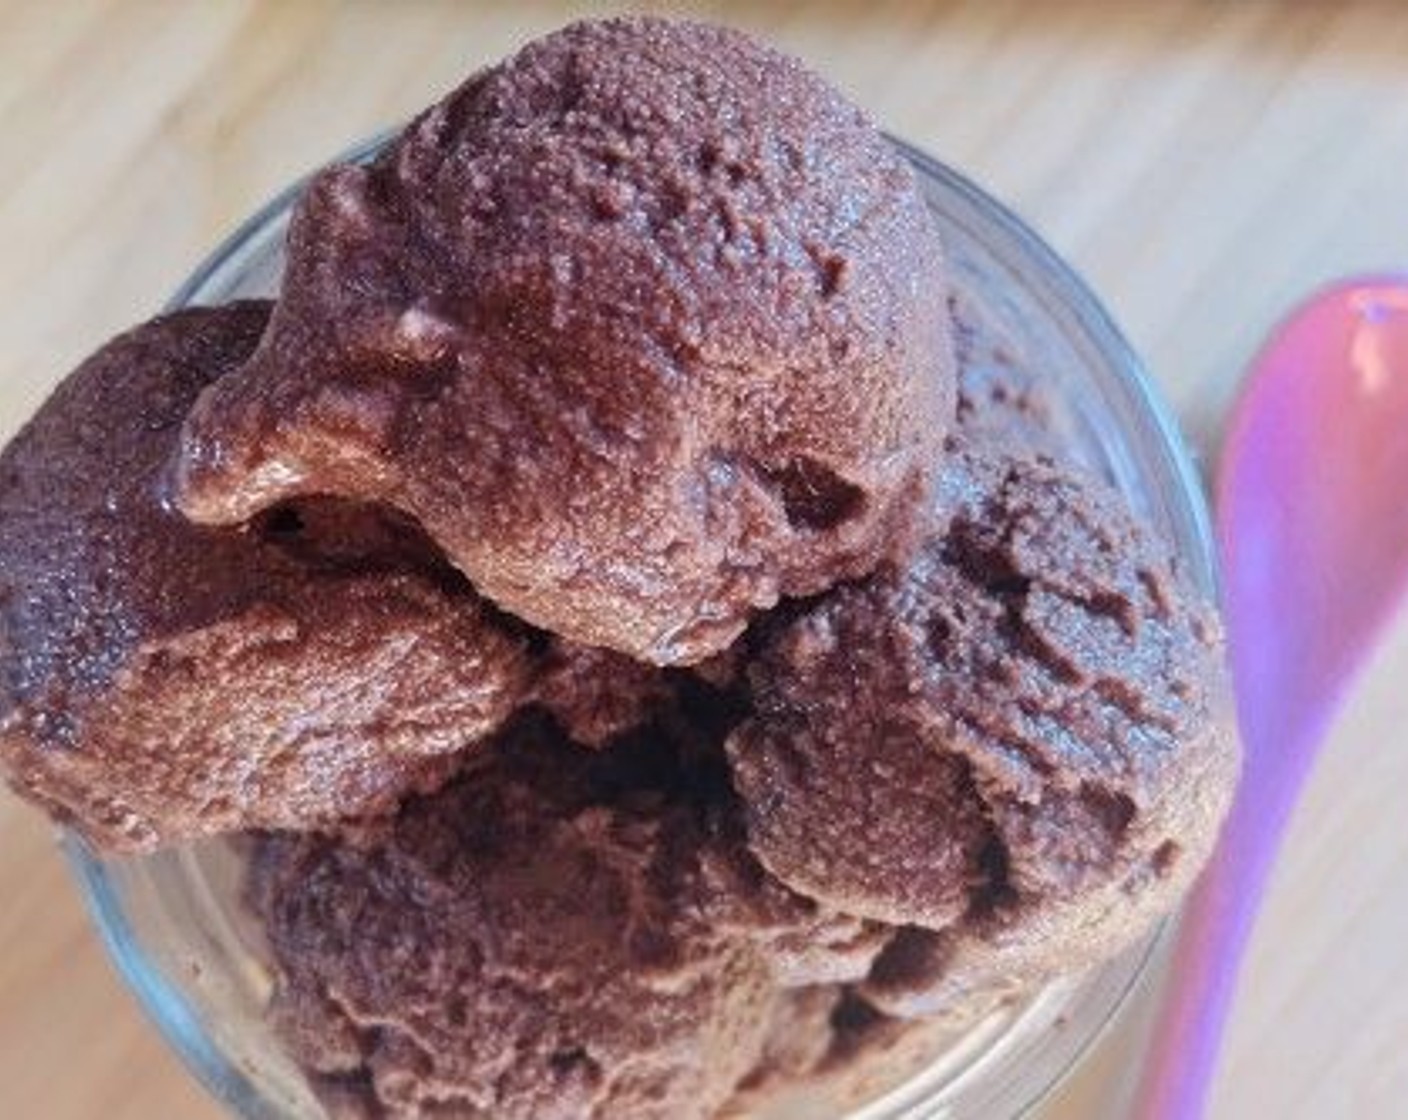 step 4 Serve your chocolate sorbet right up for a creamier texture, or transfer into a container and freeze it. Feel free to serve with chopped nuts, drizzled with caramel sauce or topped with vegan whipped cream!